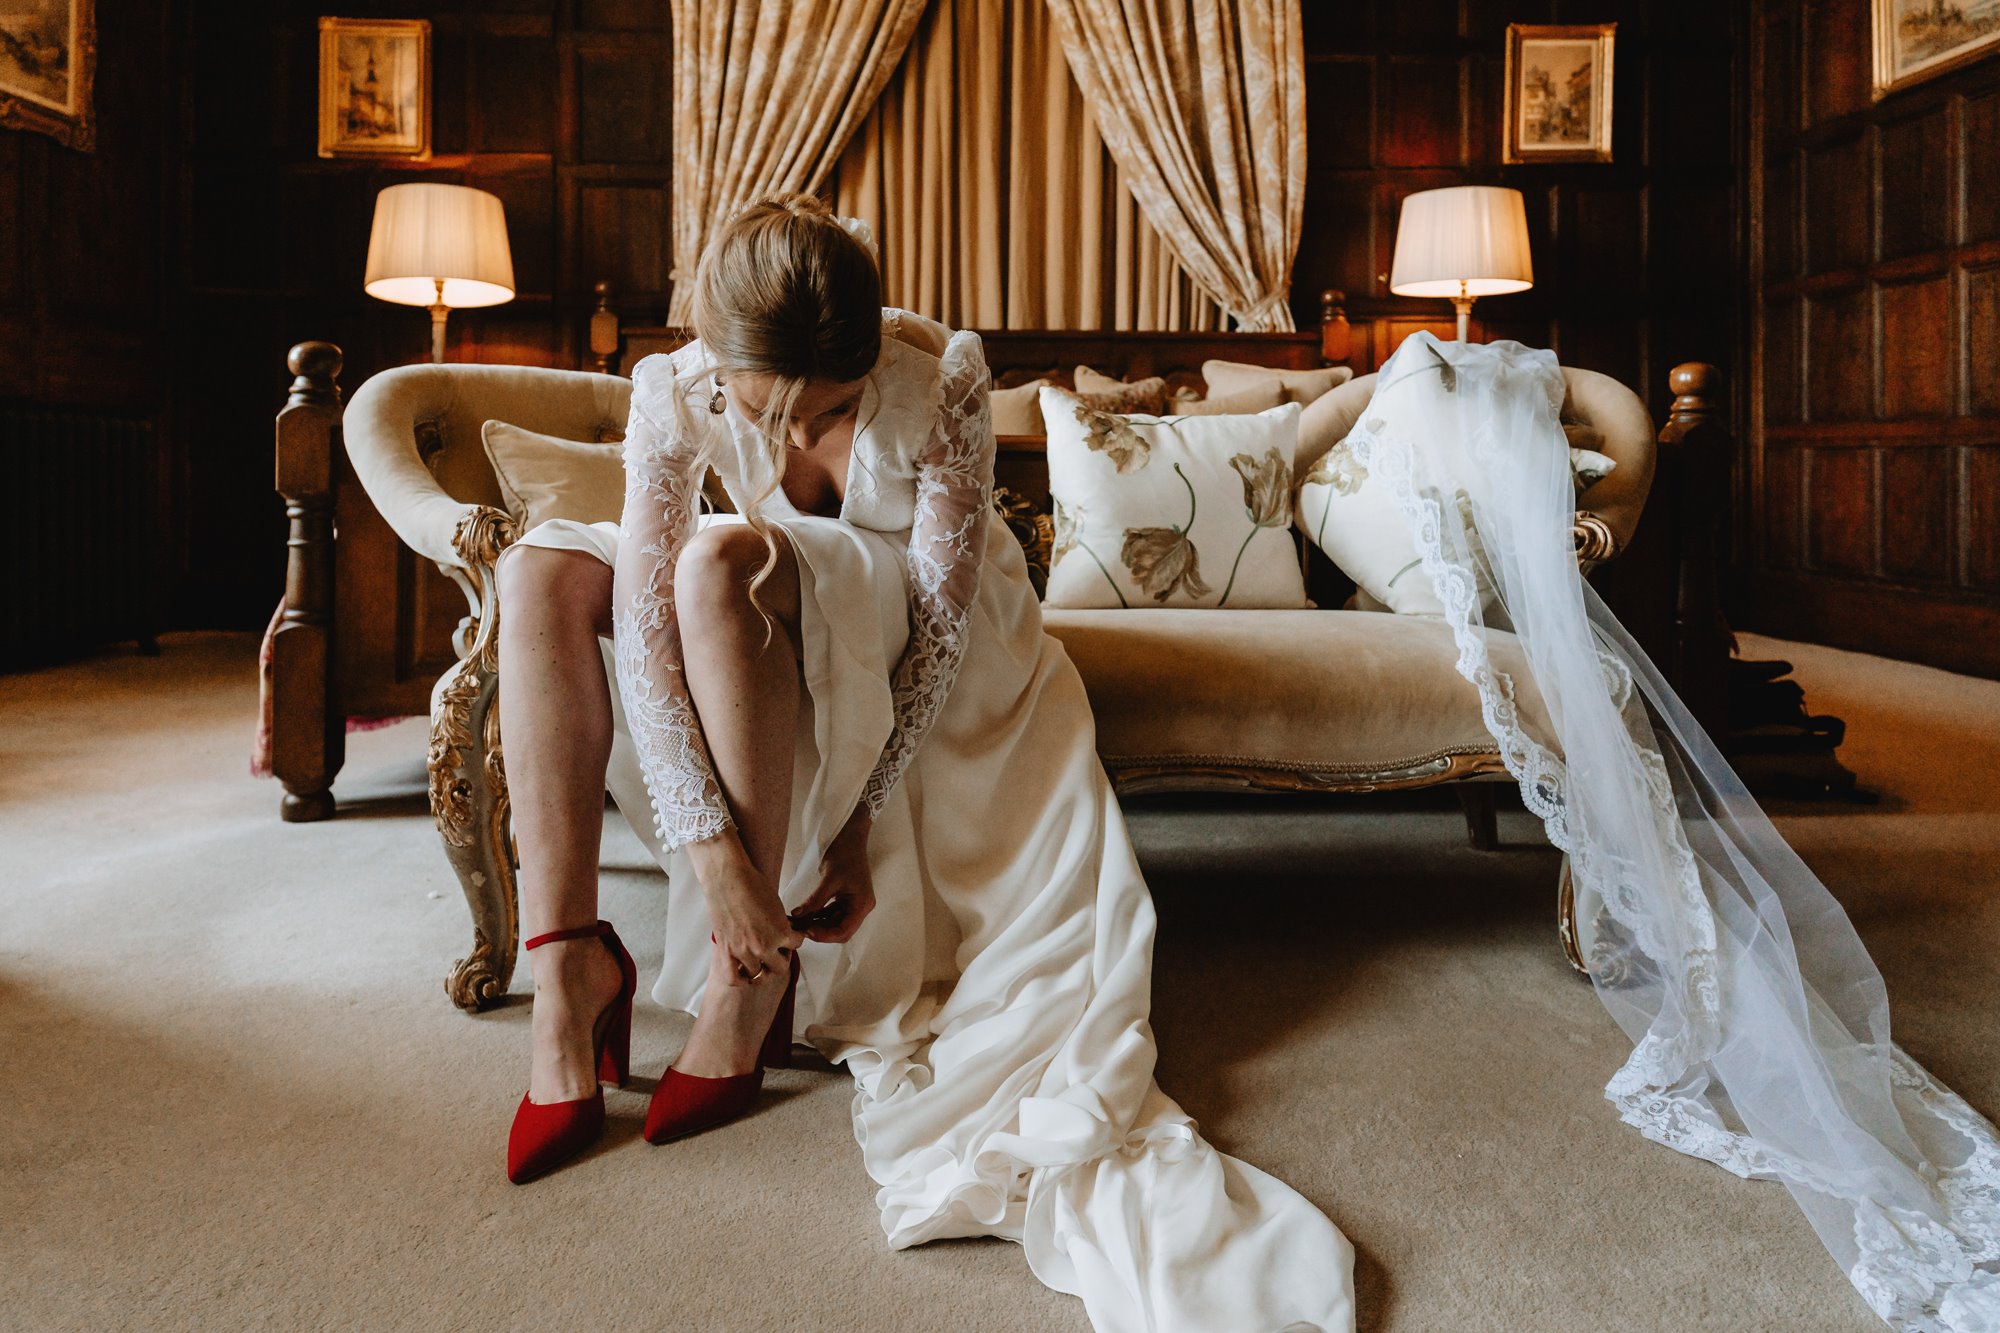 Stunning bride putting on bright red high heels as she gets ready for her wedding